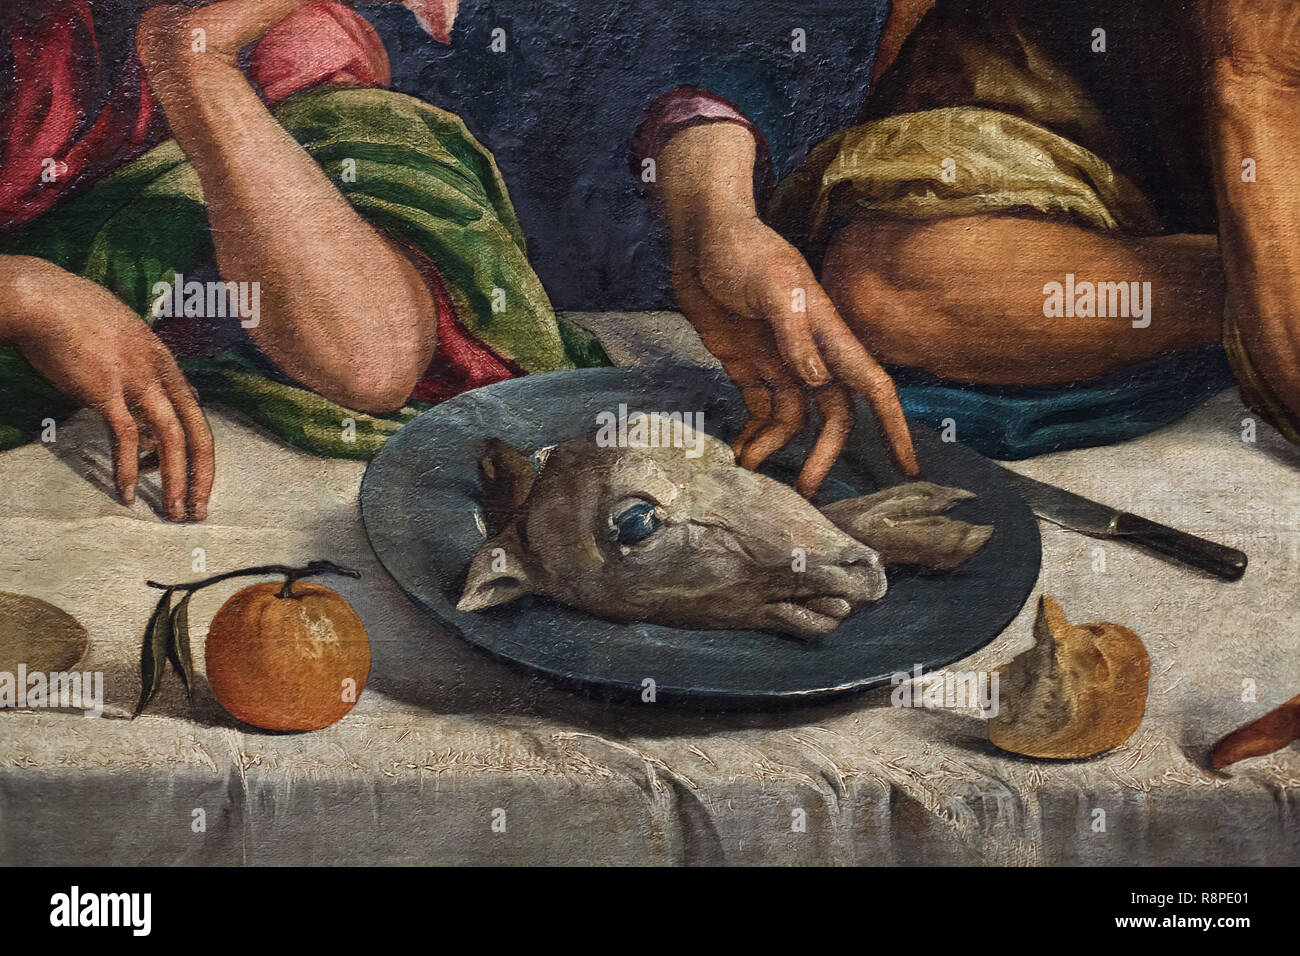 Lamb's head on the plate depicted in the detail of the painting 'Last Supper' by Italian Renaissance painter Jacopo Bassano, also known as Jacopo dal Ponte (1547-1548) on display at the exhibition 'The Young Tintoretto' in the Gallerie dell'Accademia in Venice, Italy. The exhibition marking the 500th anniversary of the birth of Italian Renaissance painter Tintoretto runs till 5 January 2019. Stock Photo